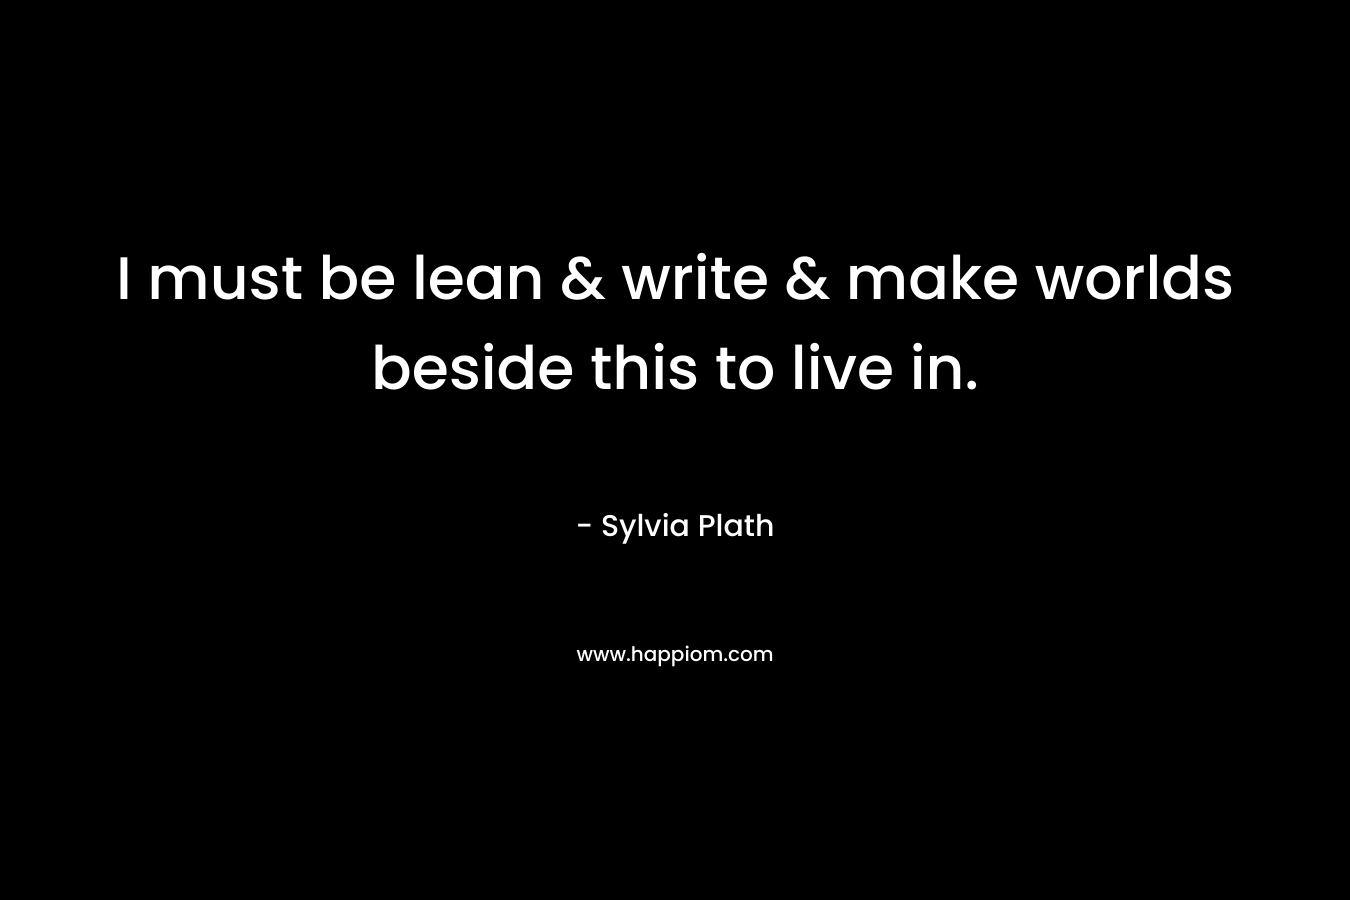 I must be lean & write & make worlds beside this to live in. – Sylvia Plath